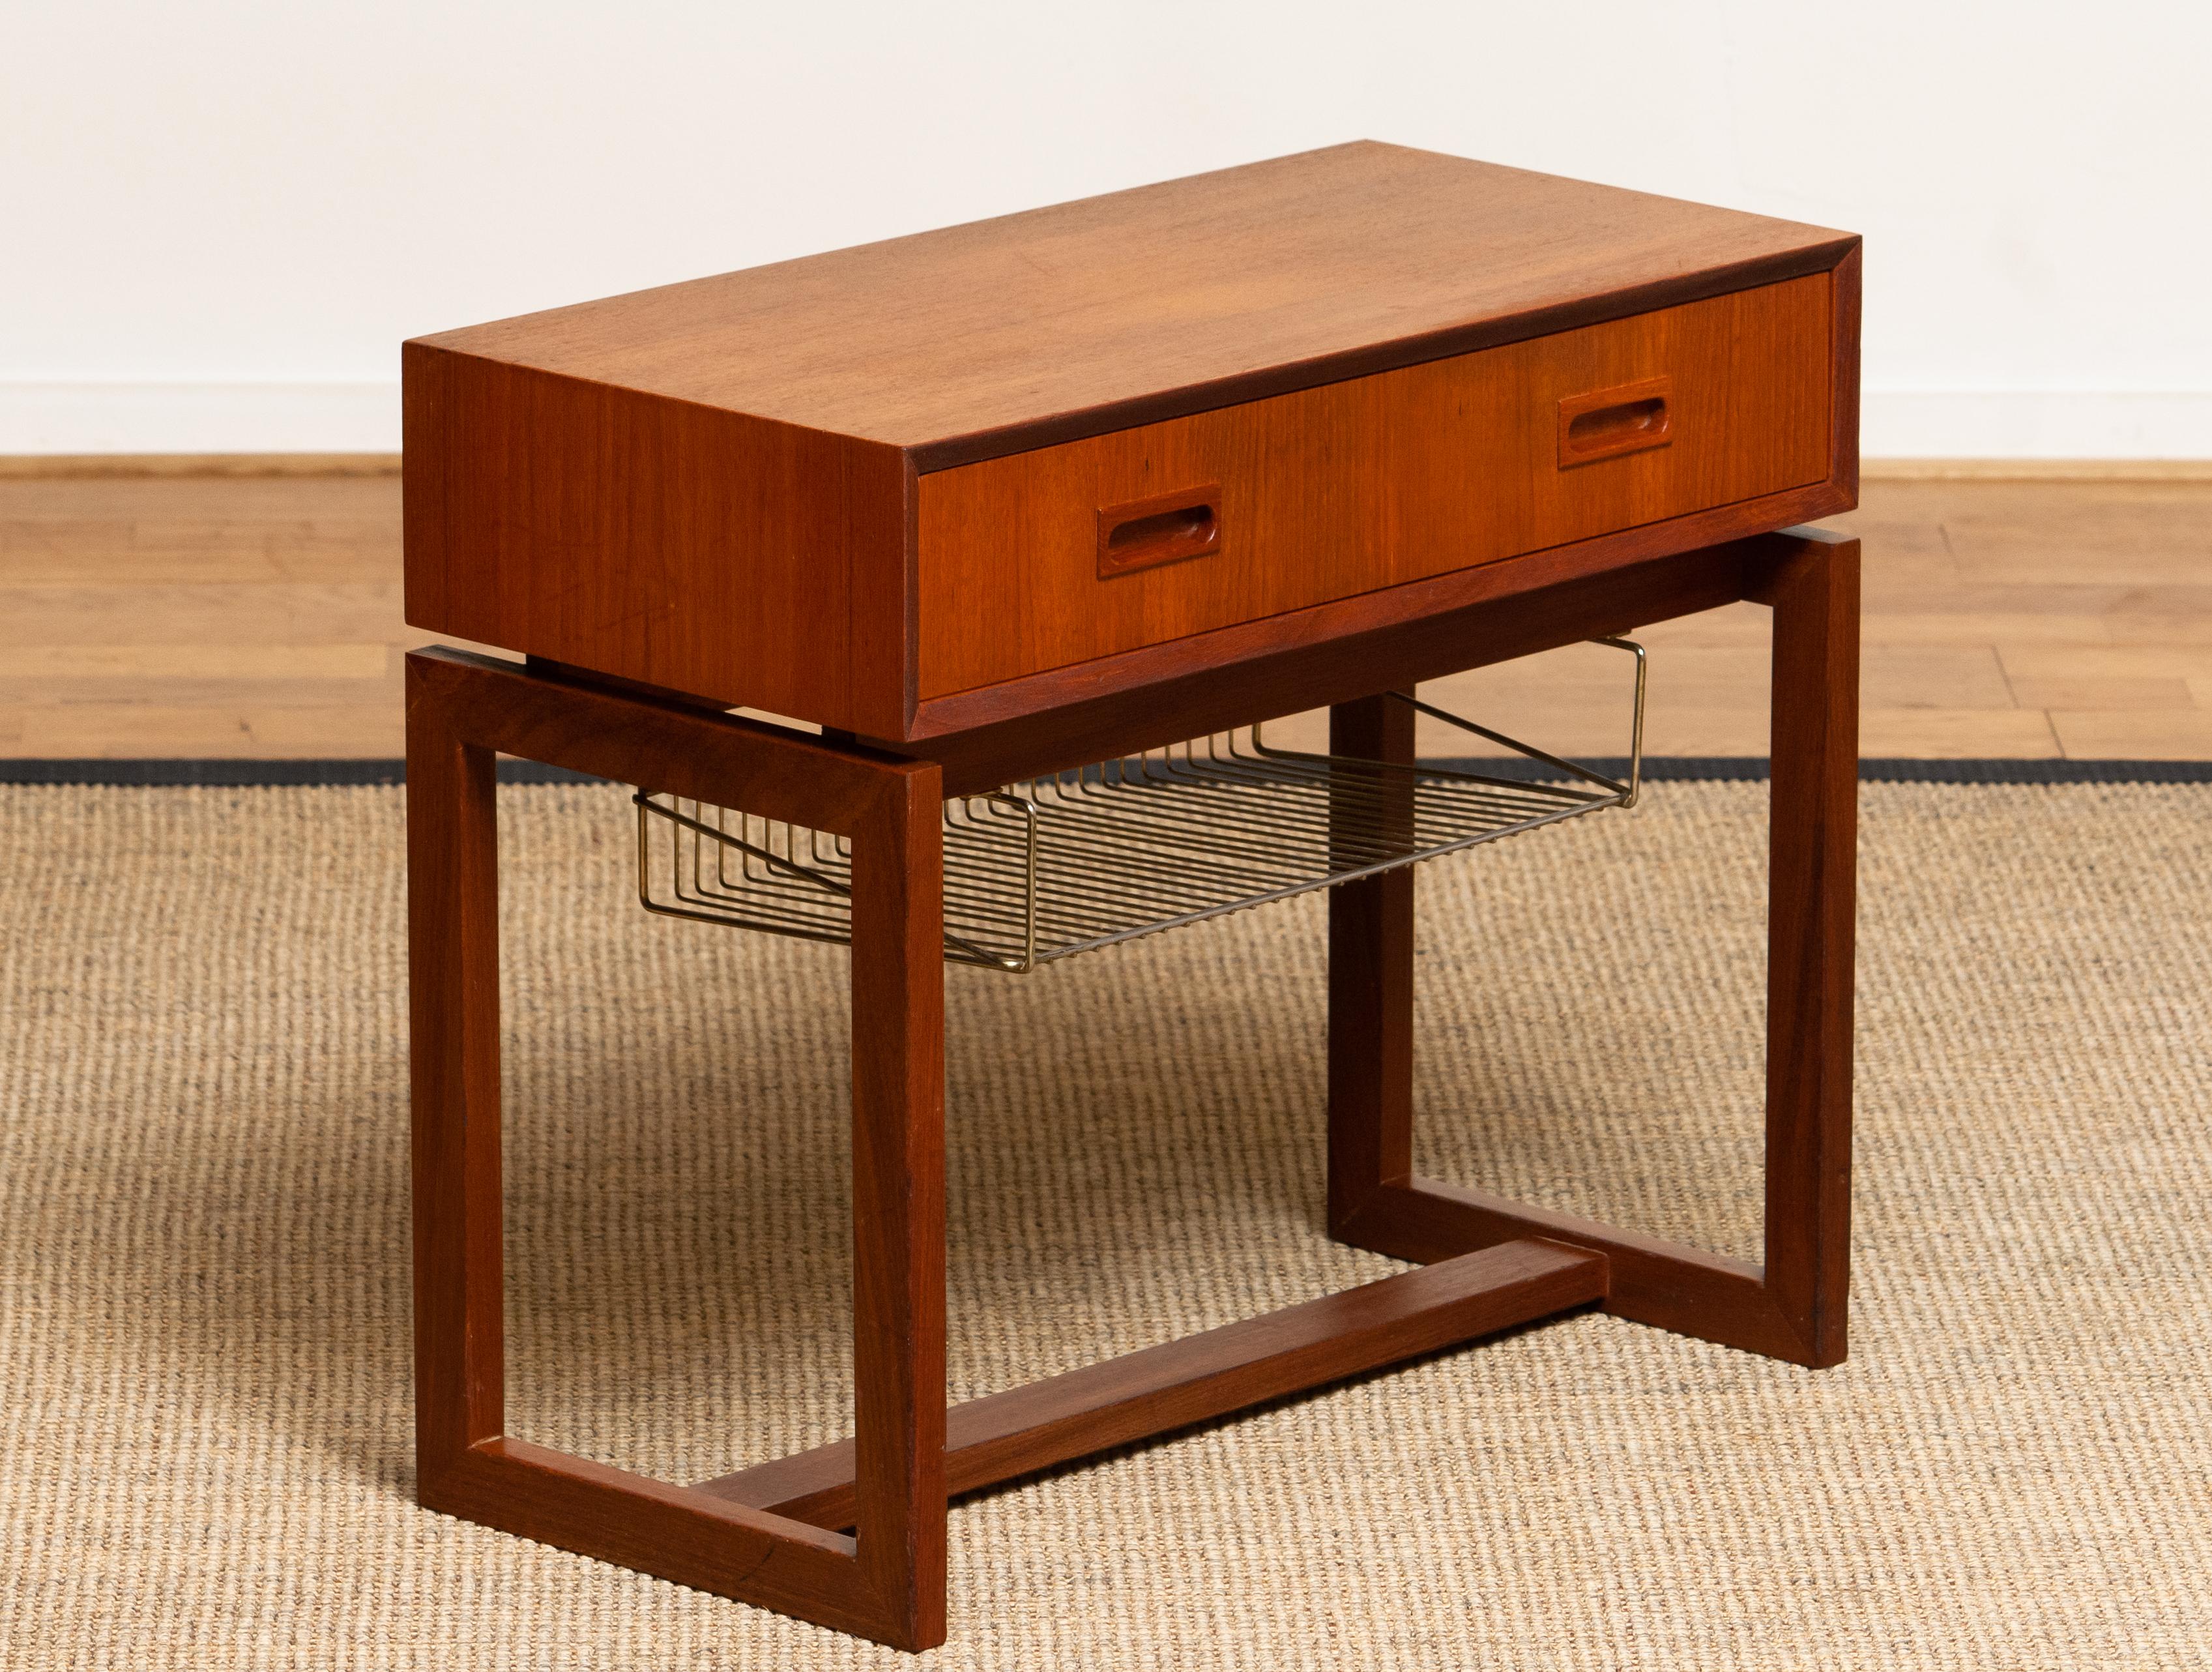 Danish 1960's Teak Hall Cabinet Side Table from Denmark with Brass Paper Rack